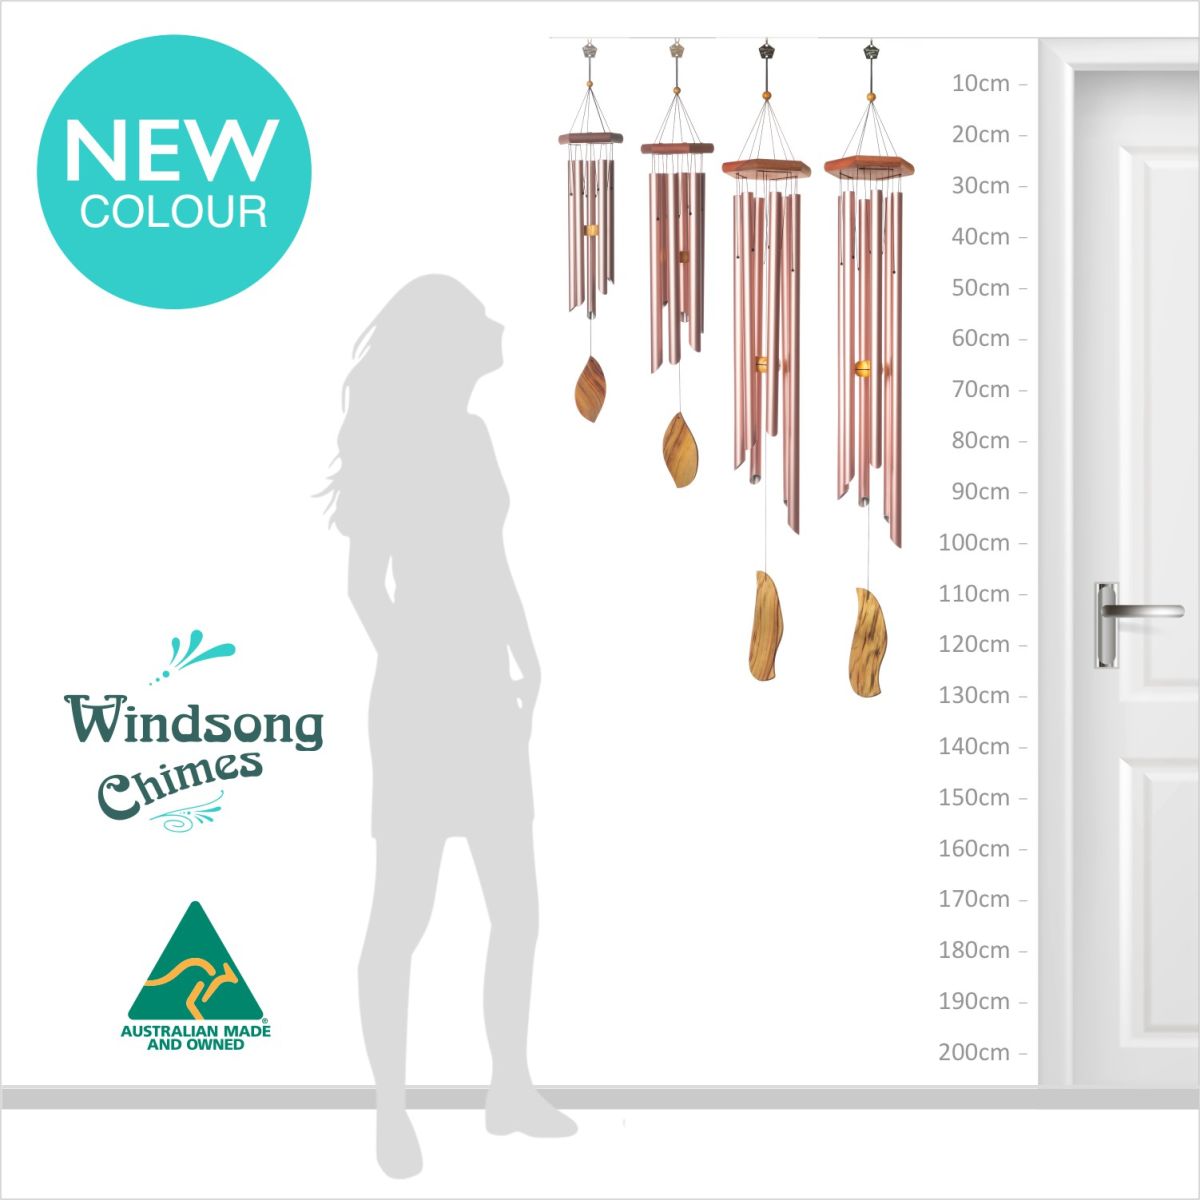 Blush, new wind chime colour